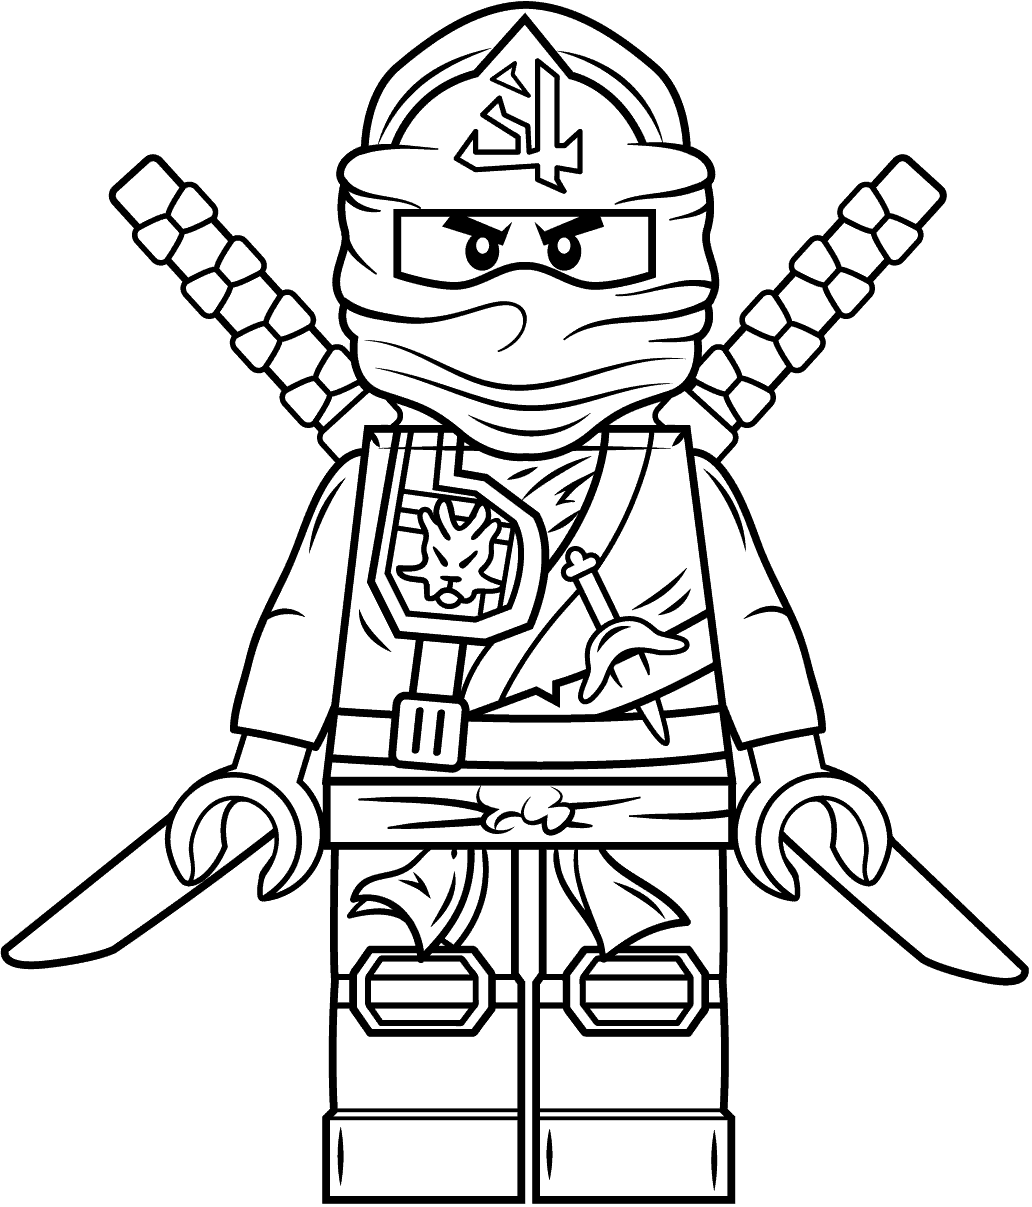 Lloyd Zukin Robe Coloring Page - Free Printable Coloring Pages for Kids